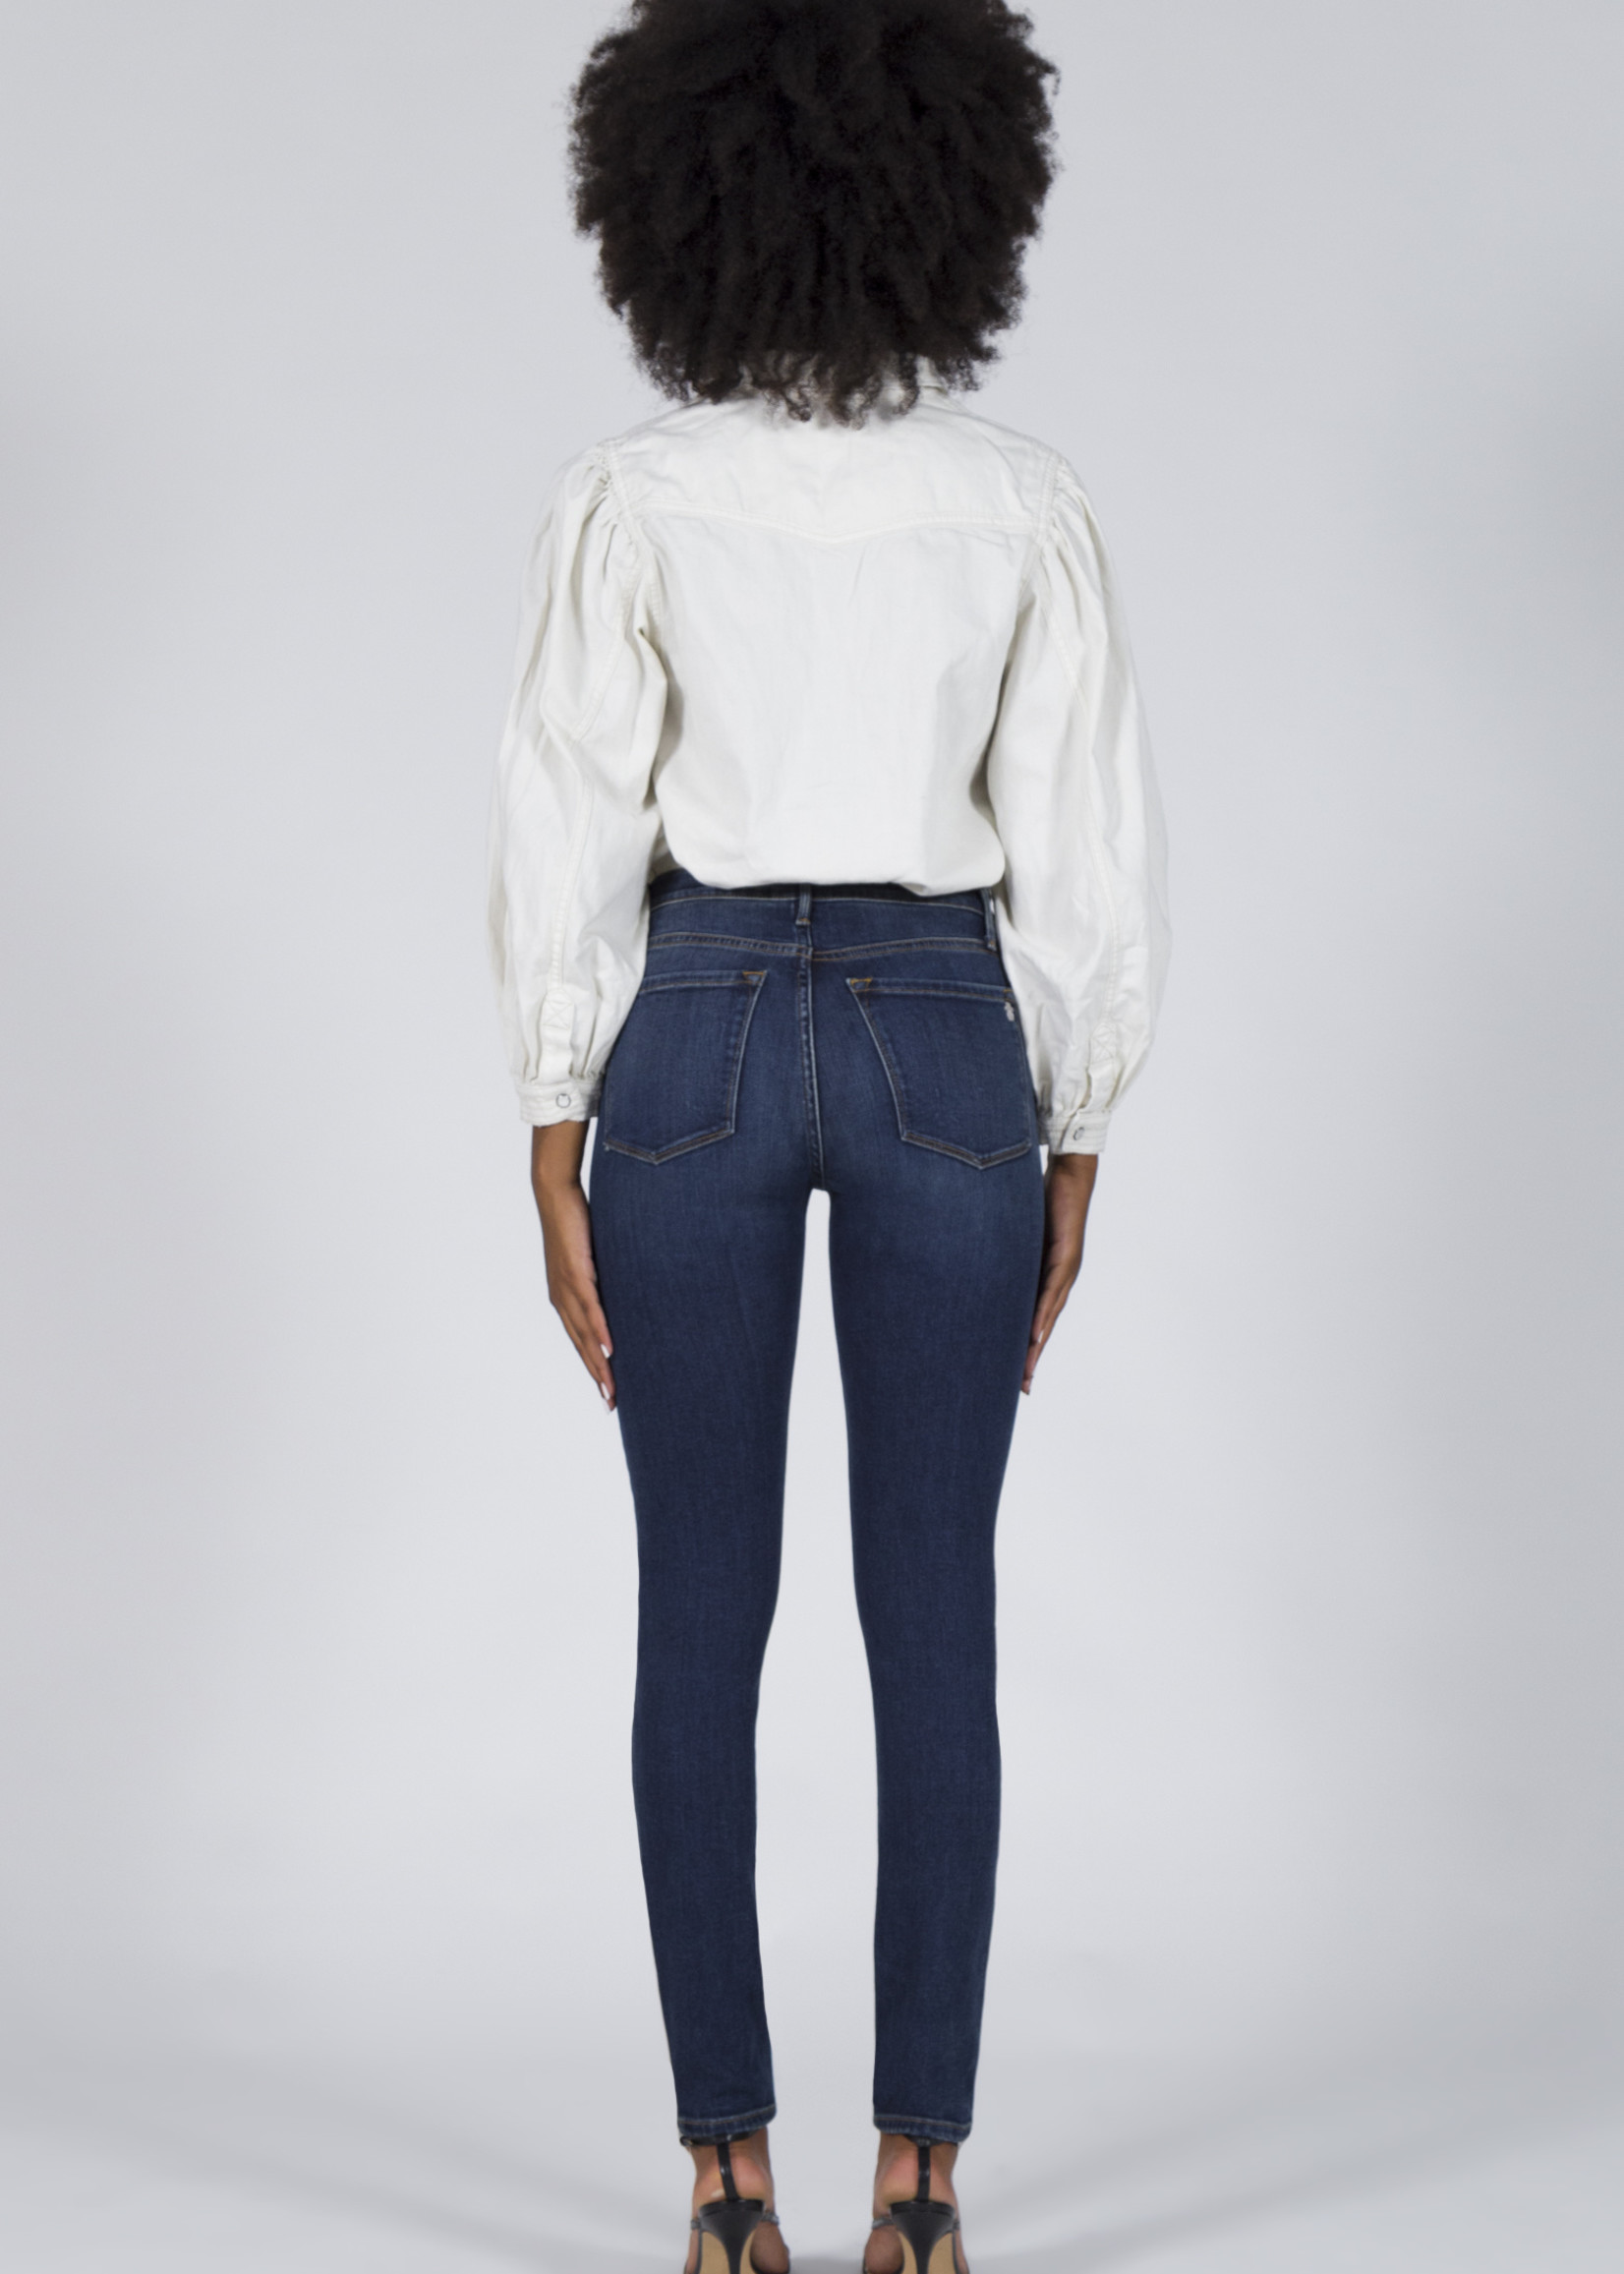 Black Orchid Denim Gisele High Rise Skinny - When We Were Young